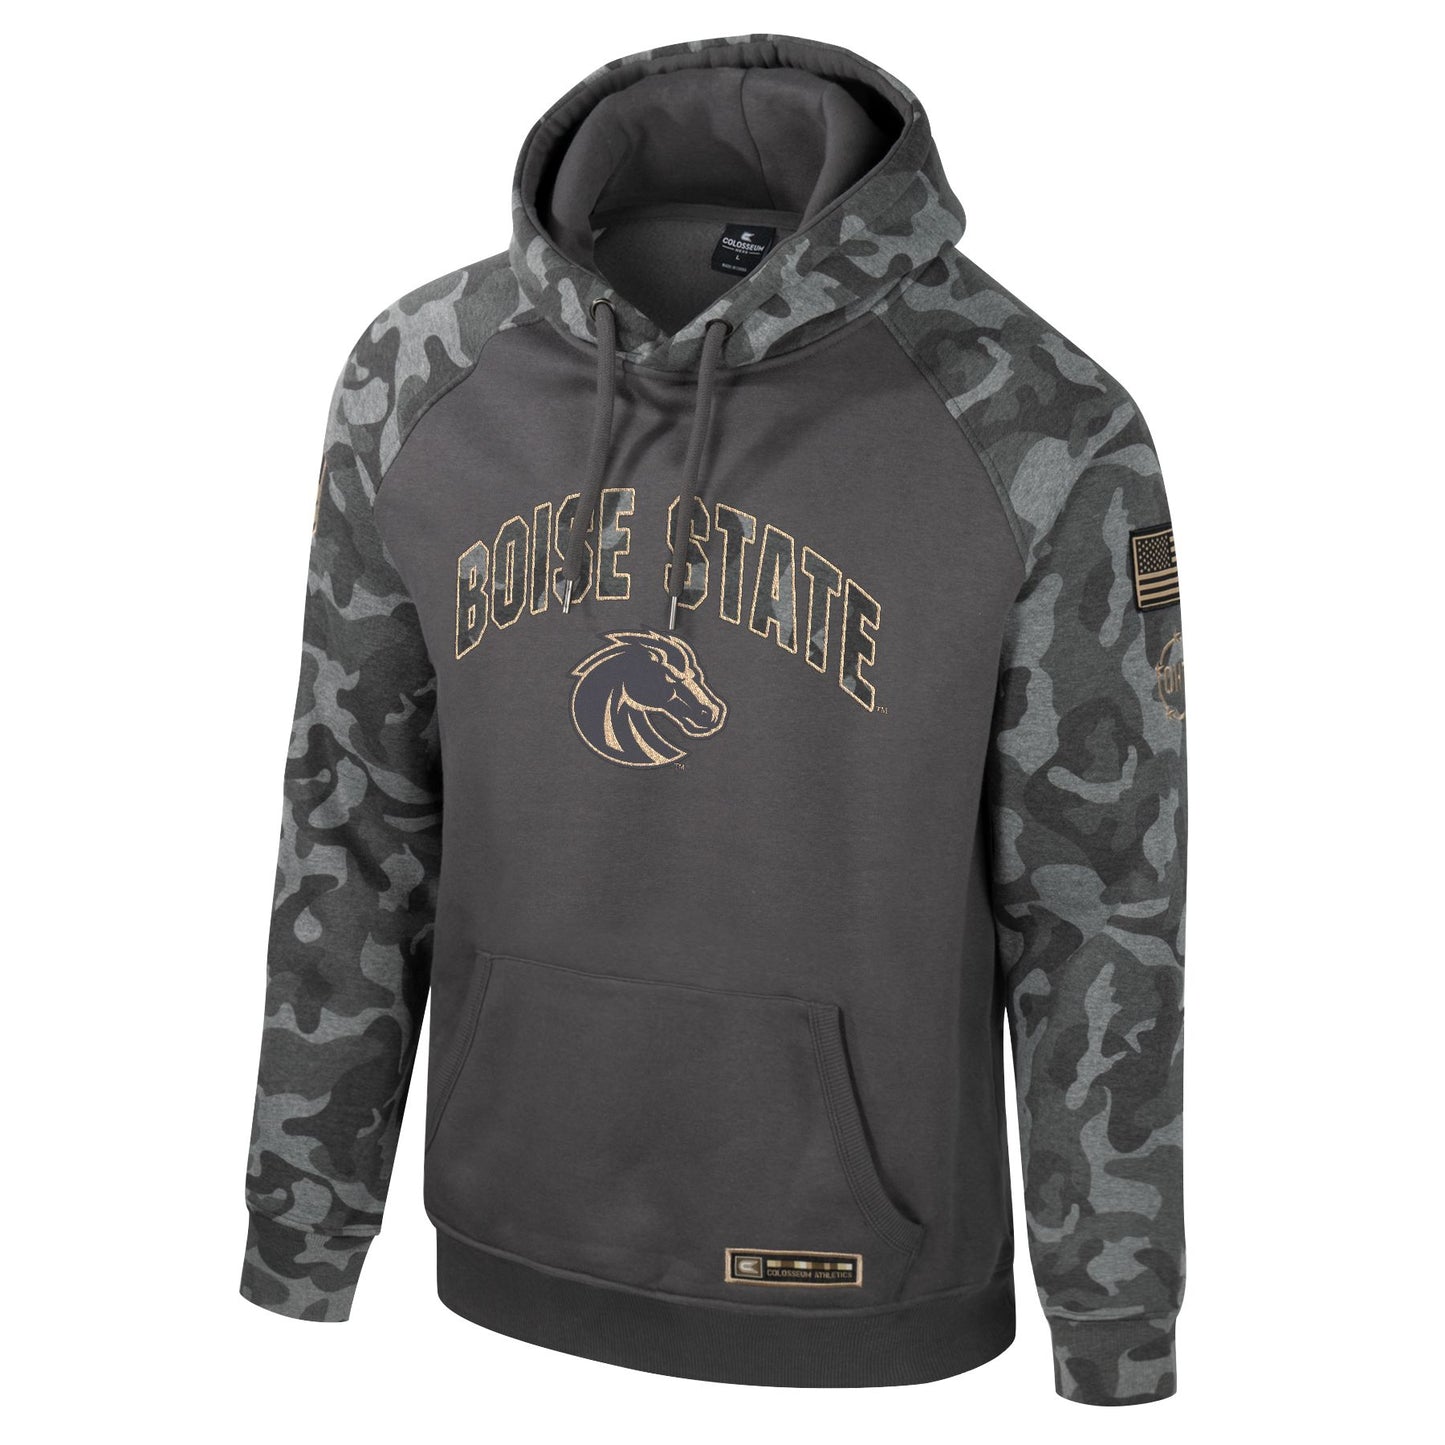 Boise State Broncos Men's Colosseum OHT Pullover Hoodie (Charcoal/Camo)